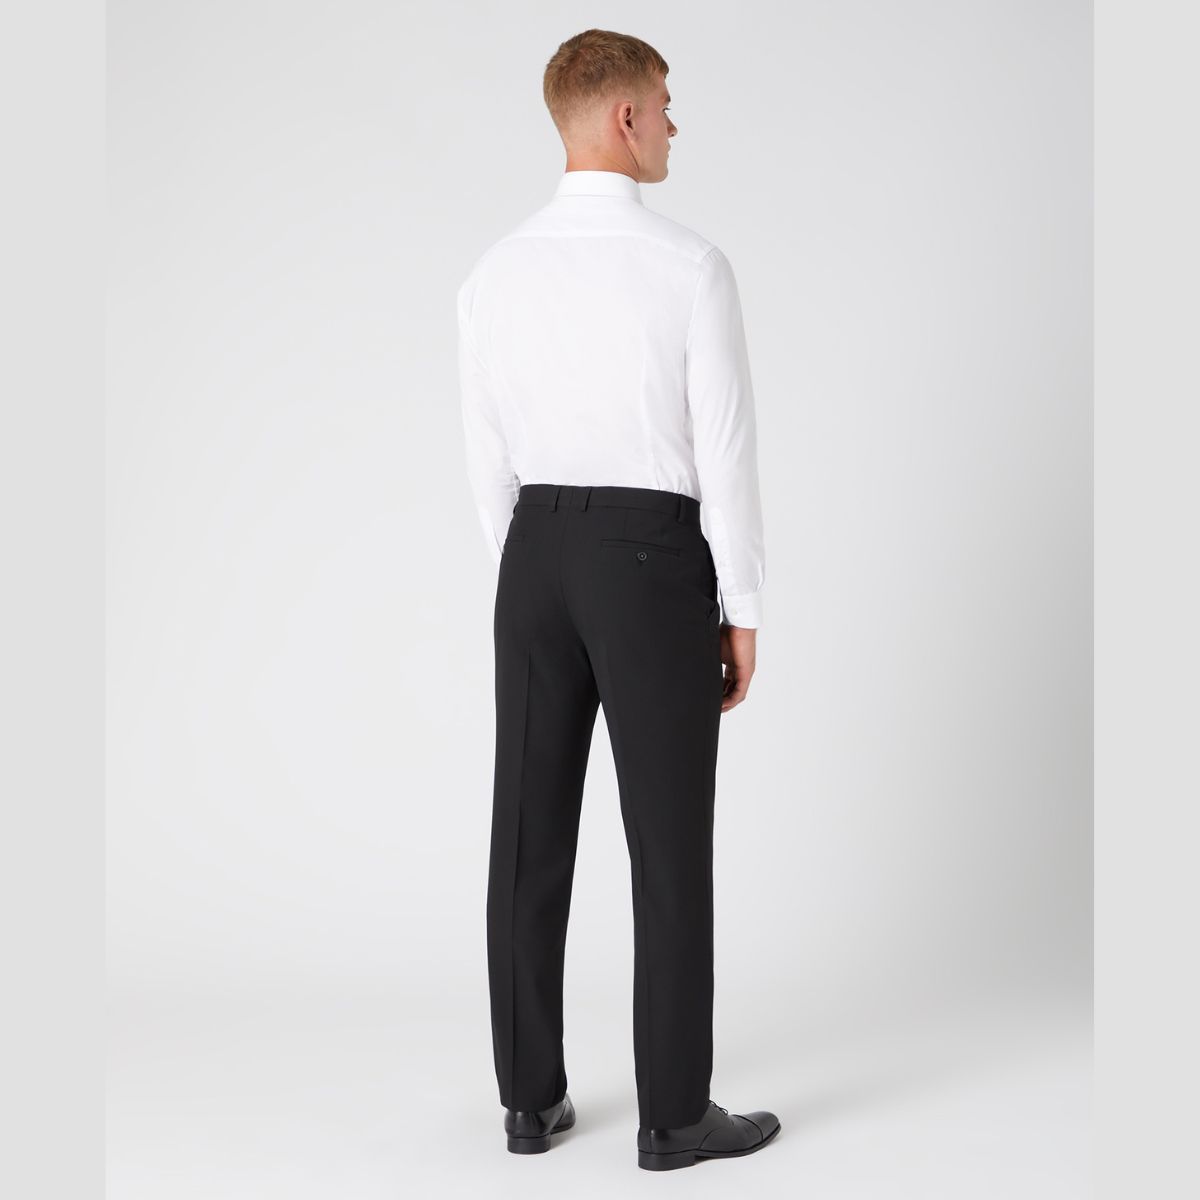 Remus Uomo Tapered Fit Suit Trousers - Black